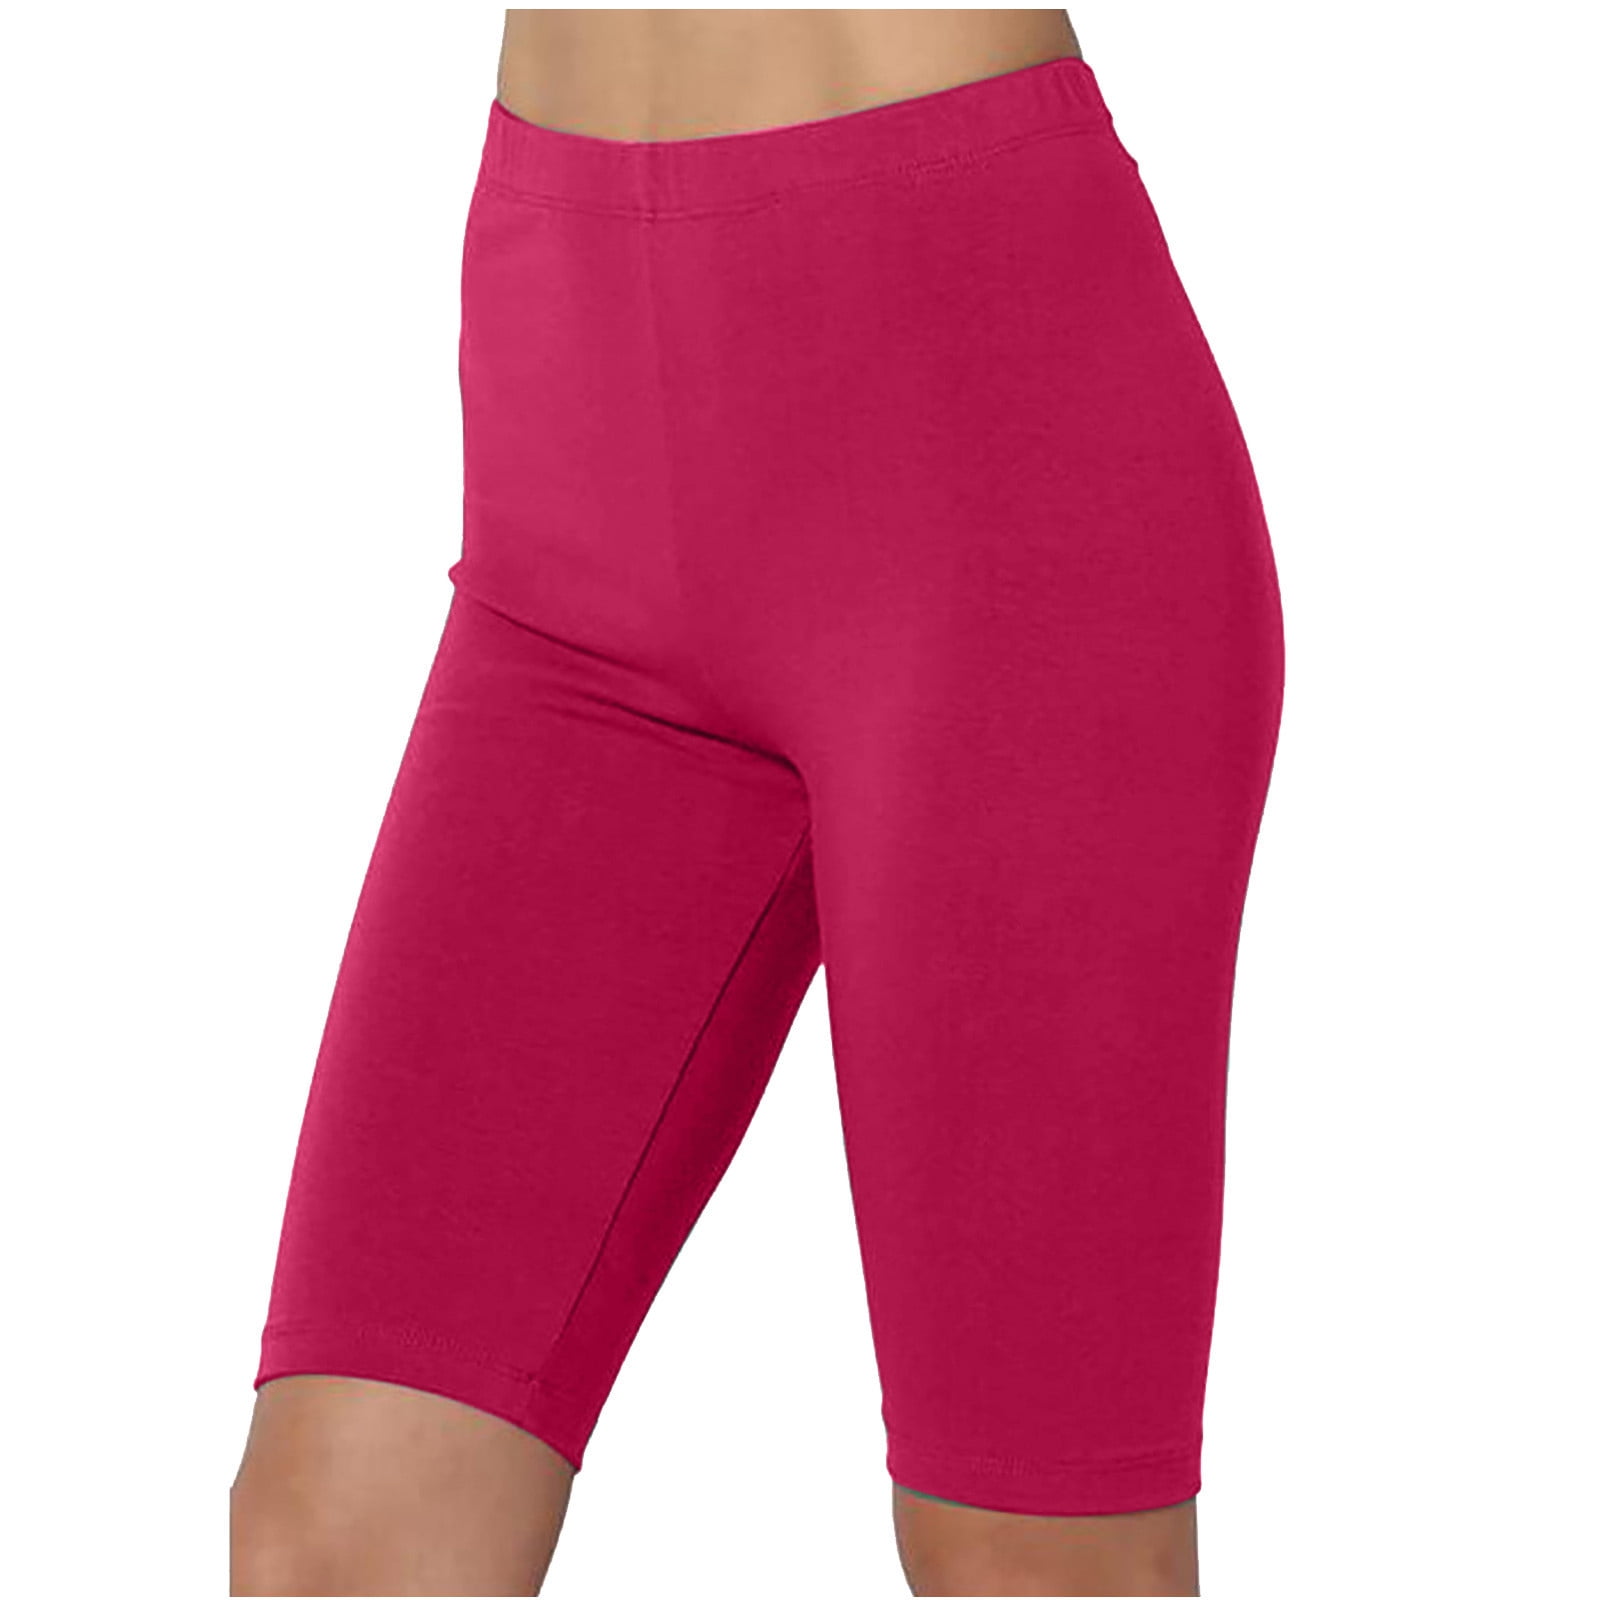 Summer Saving Wycnly Womens Yoga Pants Lightweight Slim Stretch Workout  Sports Legging Plus Size Solid Fitting Short Pants Hot Pink m 